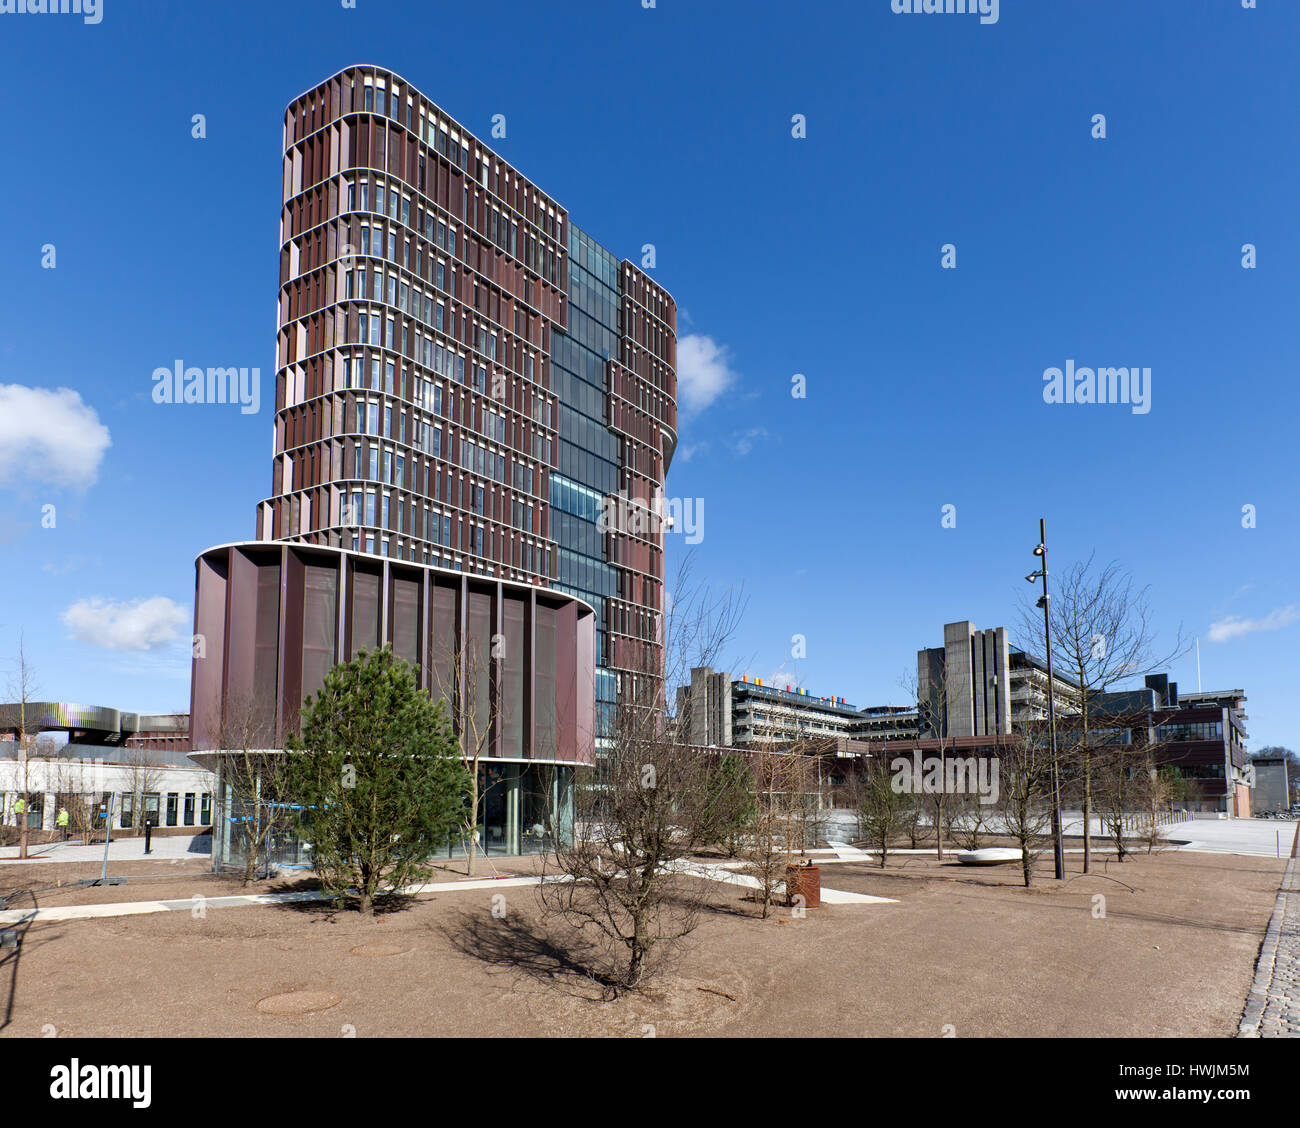 The Maersk Tower, Mærsk Tårnet. Faculty of Health and Medical Sciences, University of Copenhagen, Denmark. Part of the Panum complex. Stock Photo